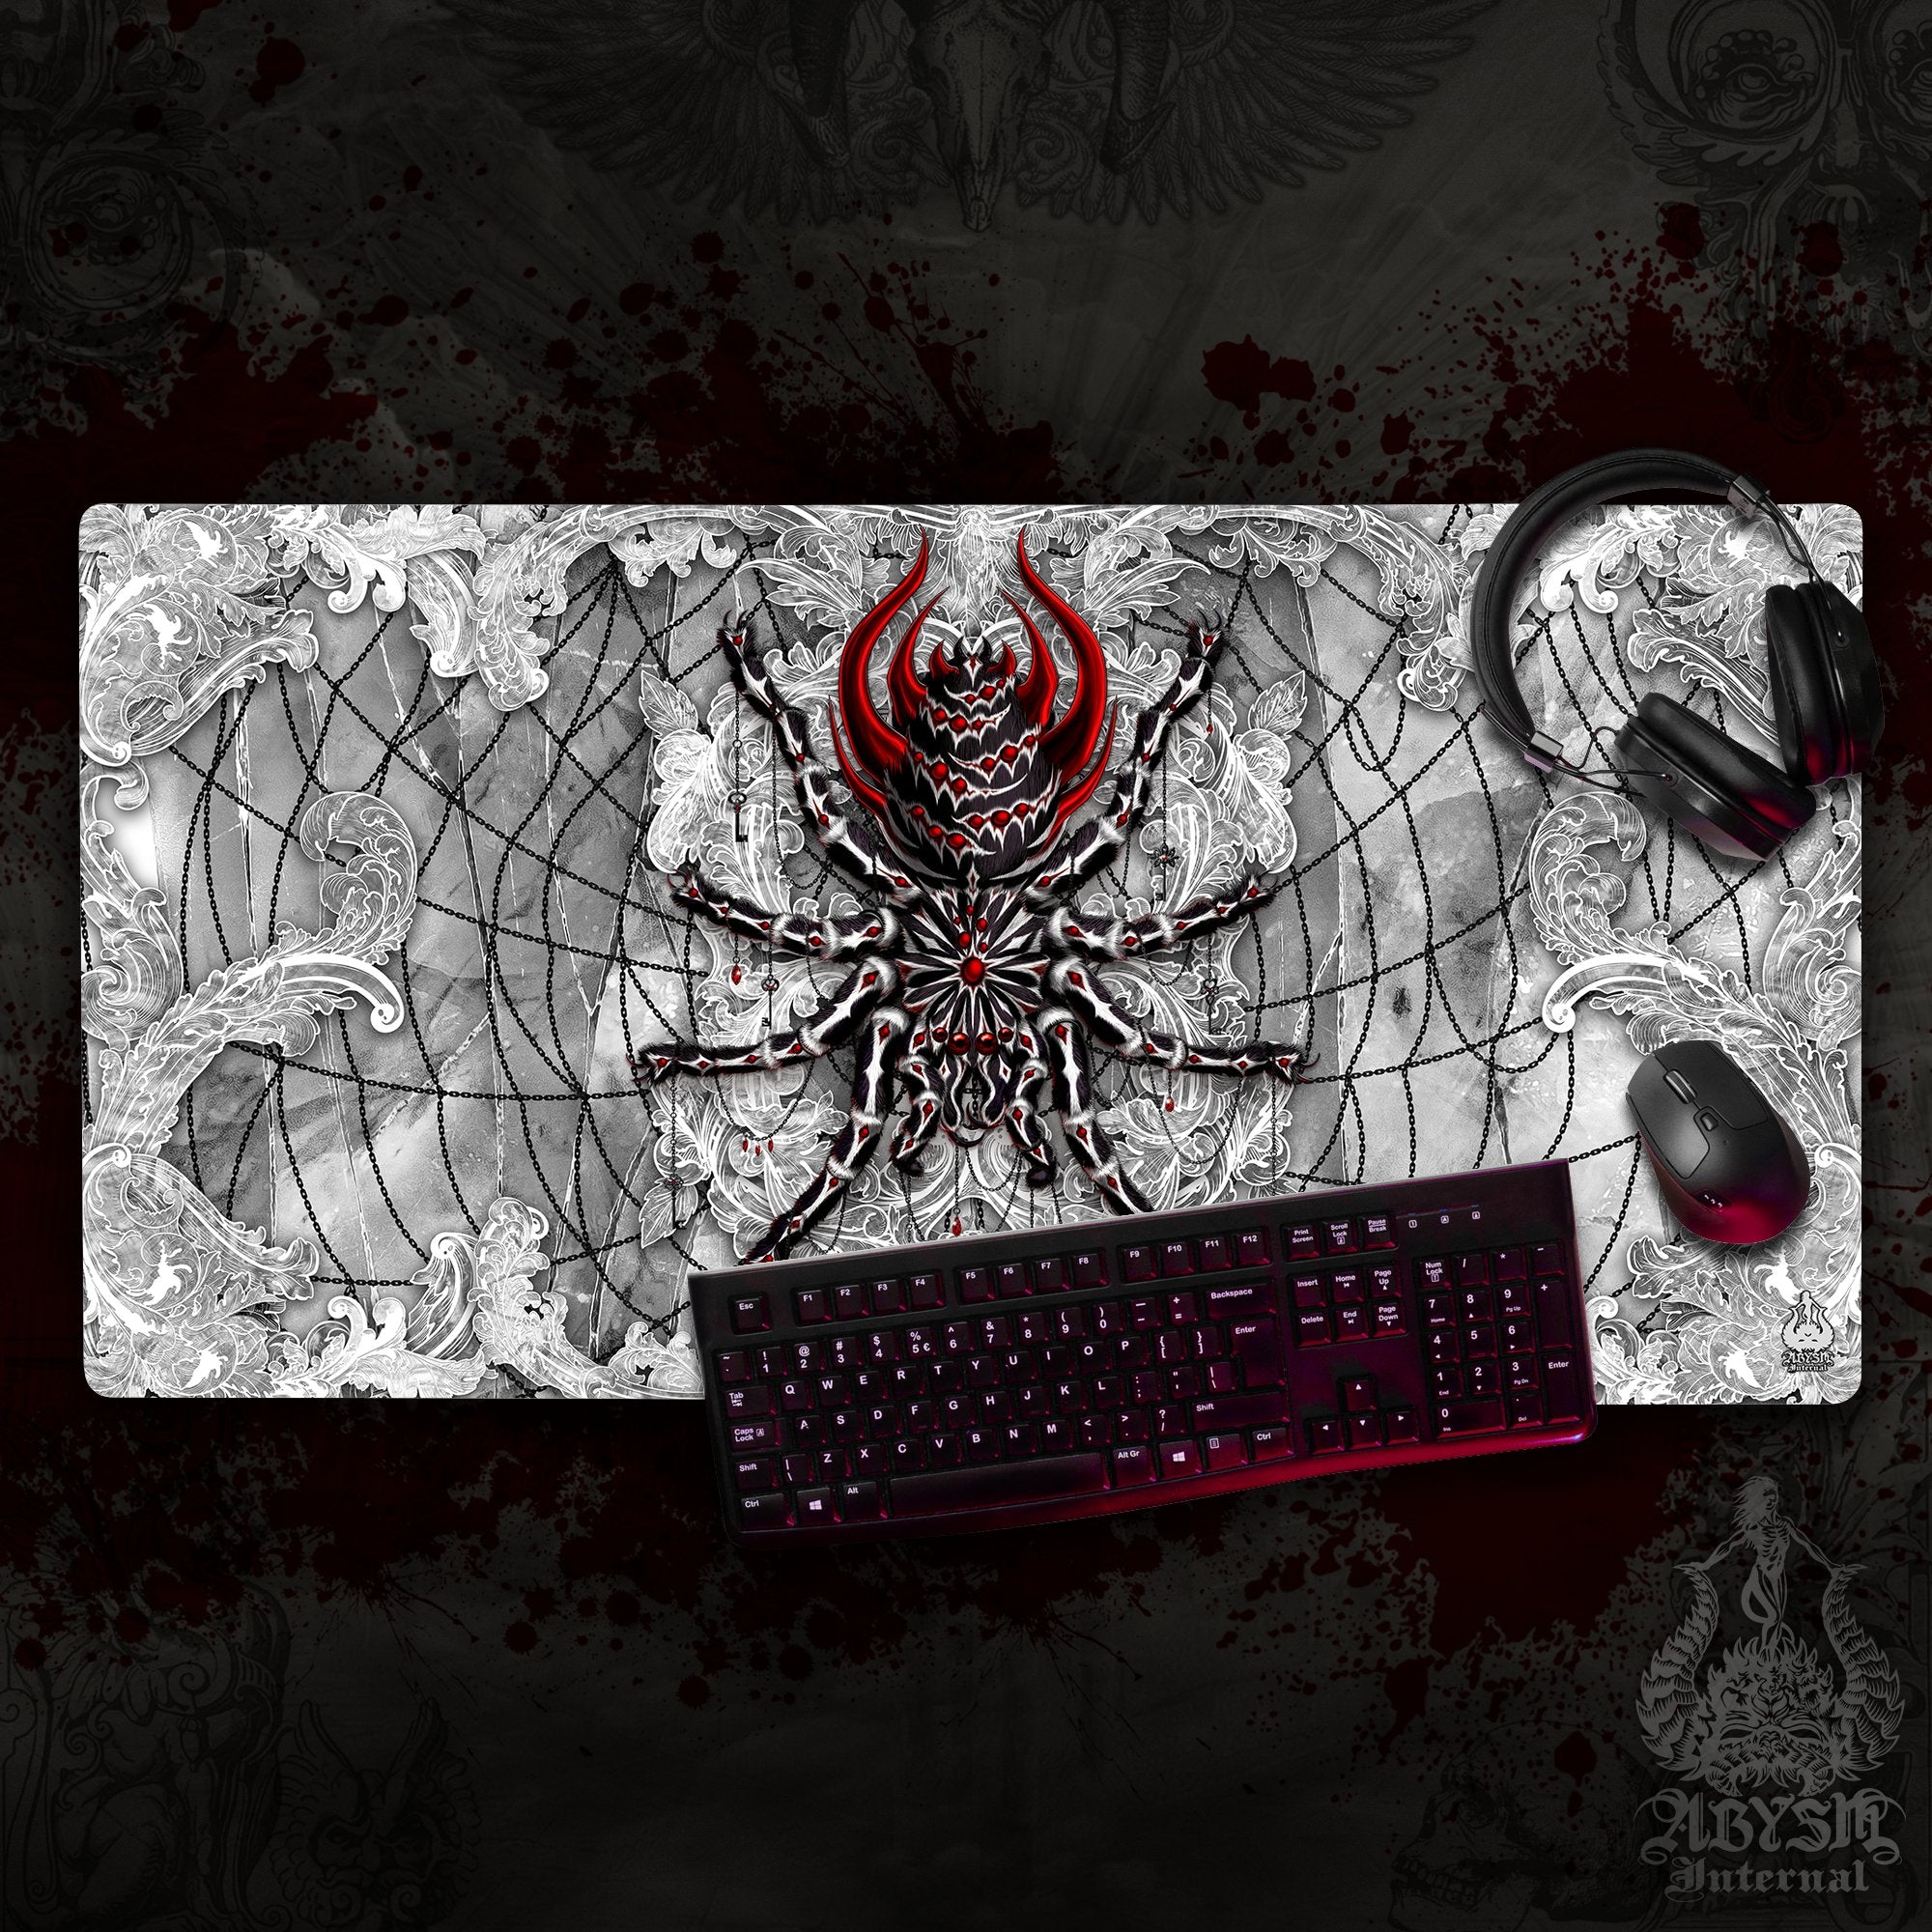 White Goth Mouse Pad, Spider Gaming Desk Mat, Tarantula Workpad, Halloween Table Protector Cover, Art Print - Stone, 3 Colors - Abysm Internal